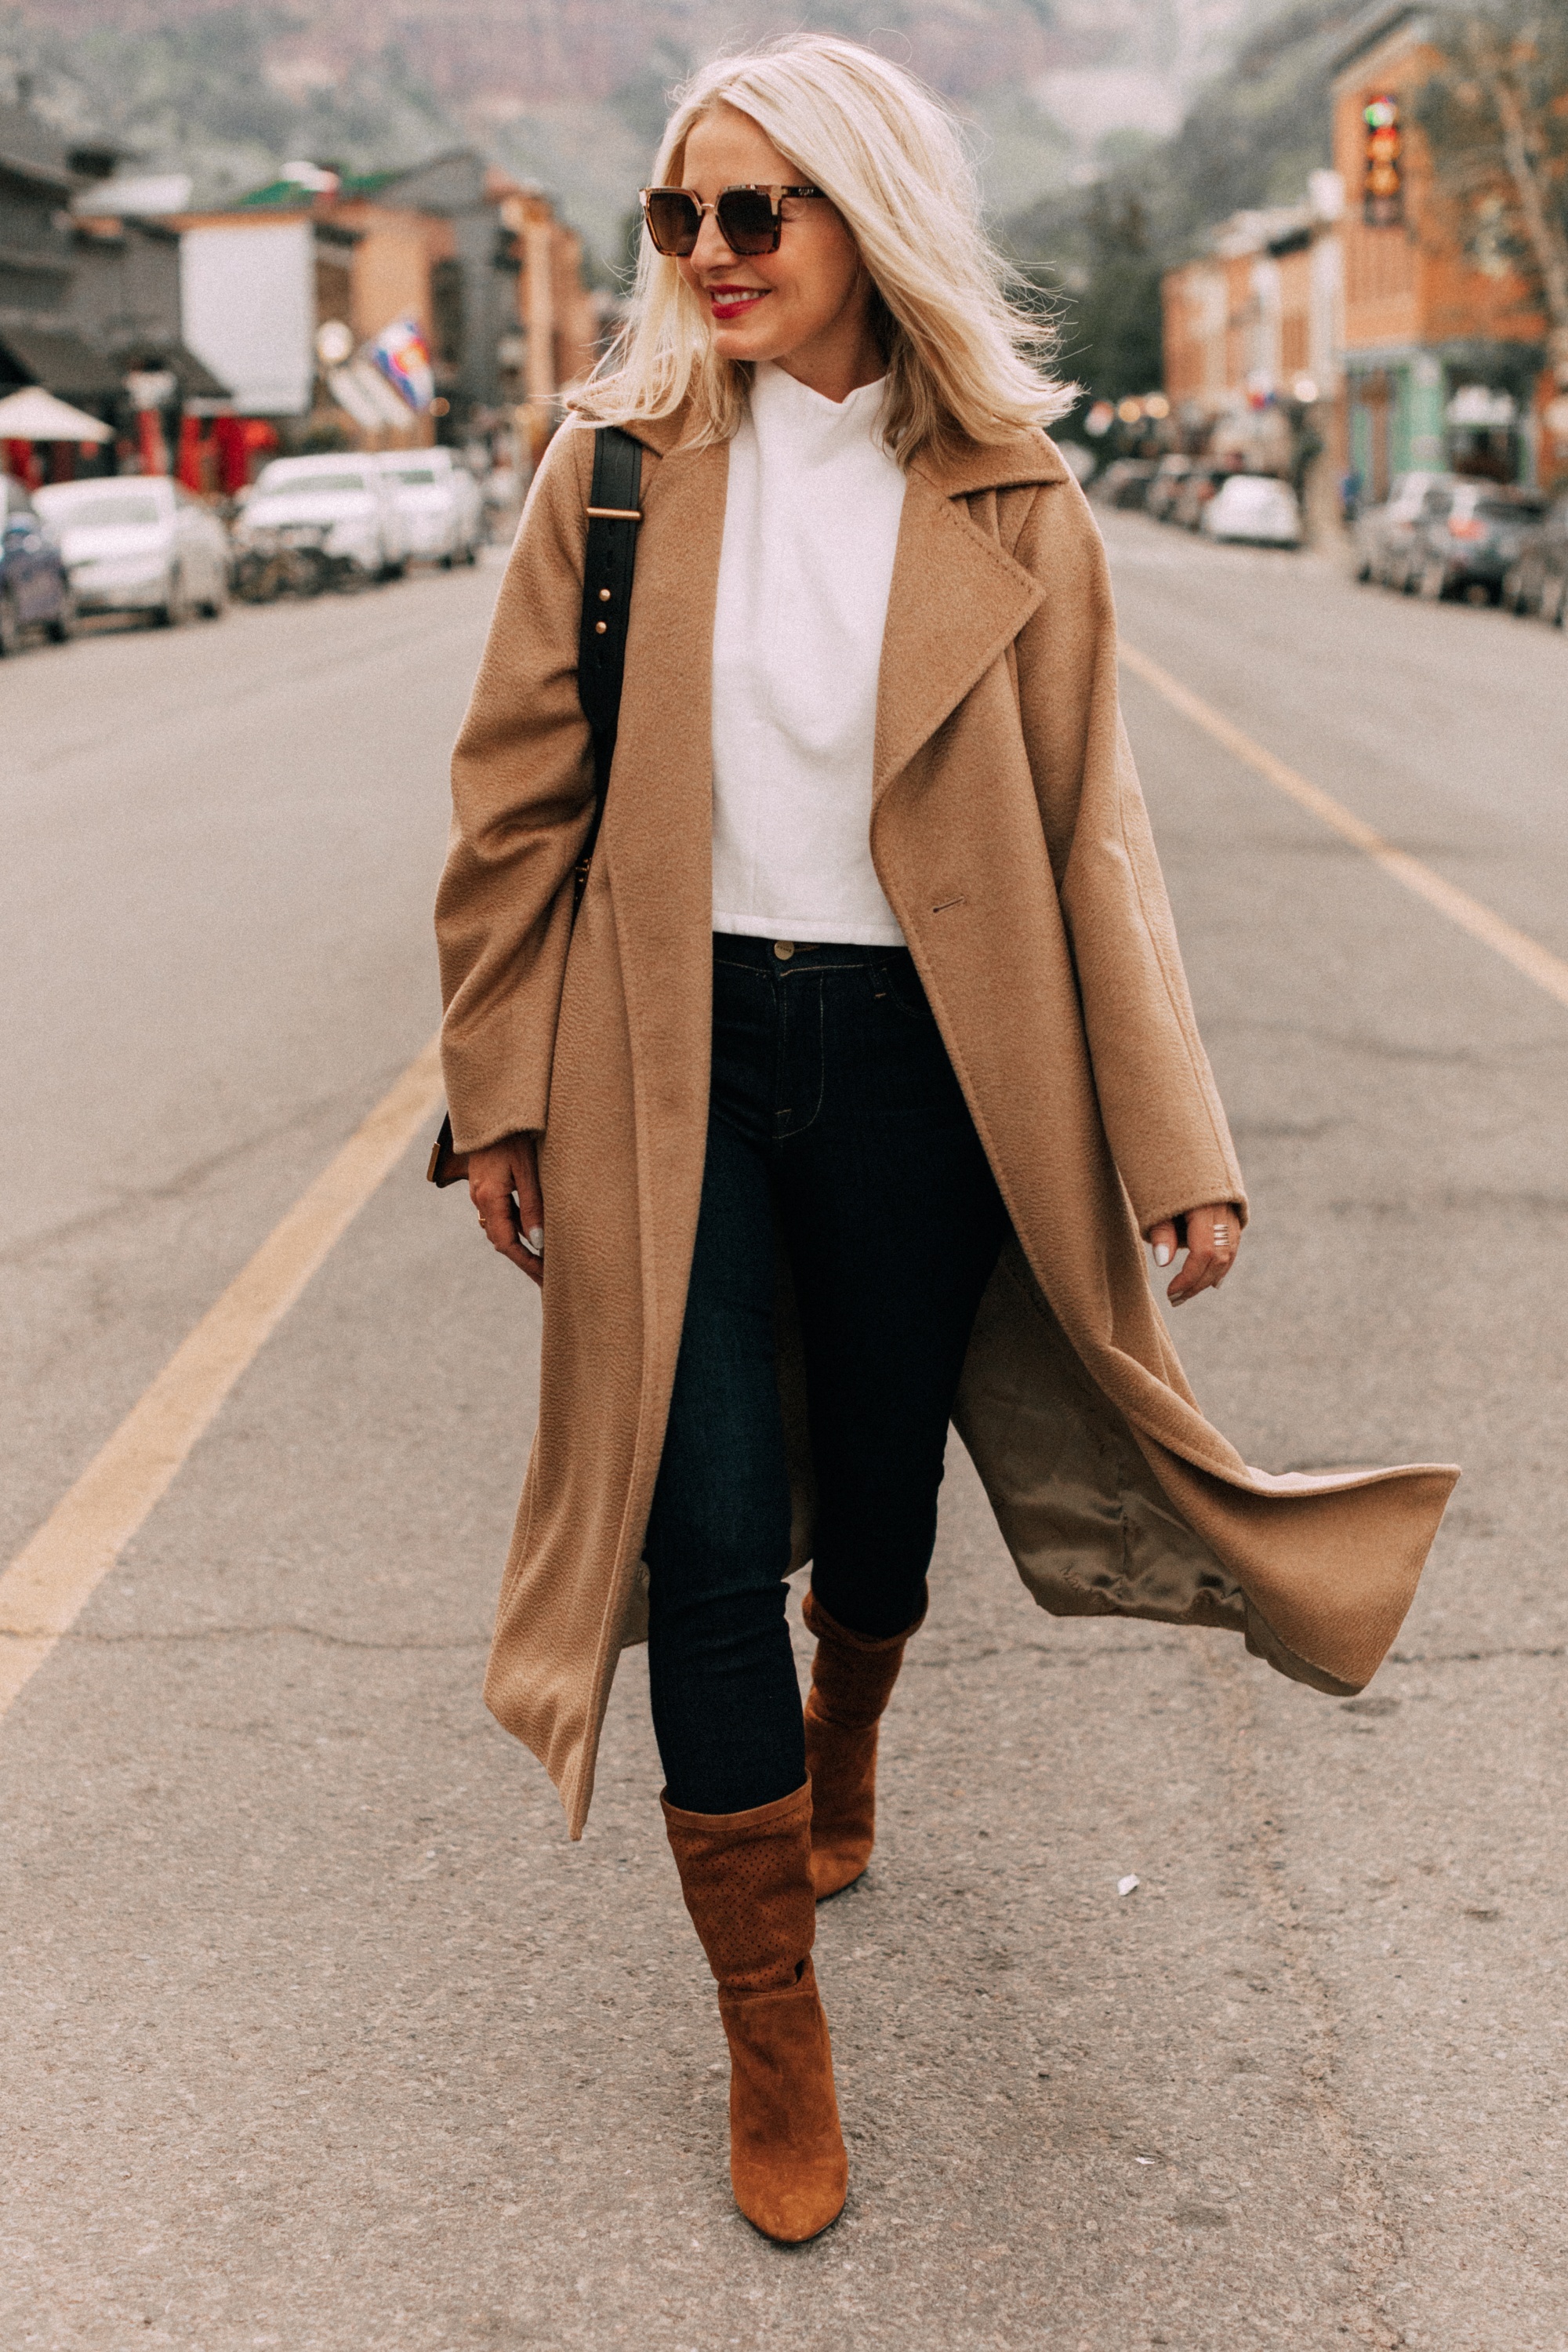 fashion blogger erin busbee wearing Max Mara camel hair wrap coat over white funnel neck top paired with dark wash skinny jeans and brown suede boots